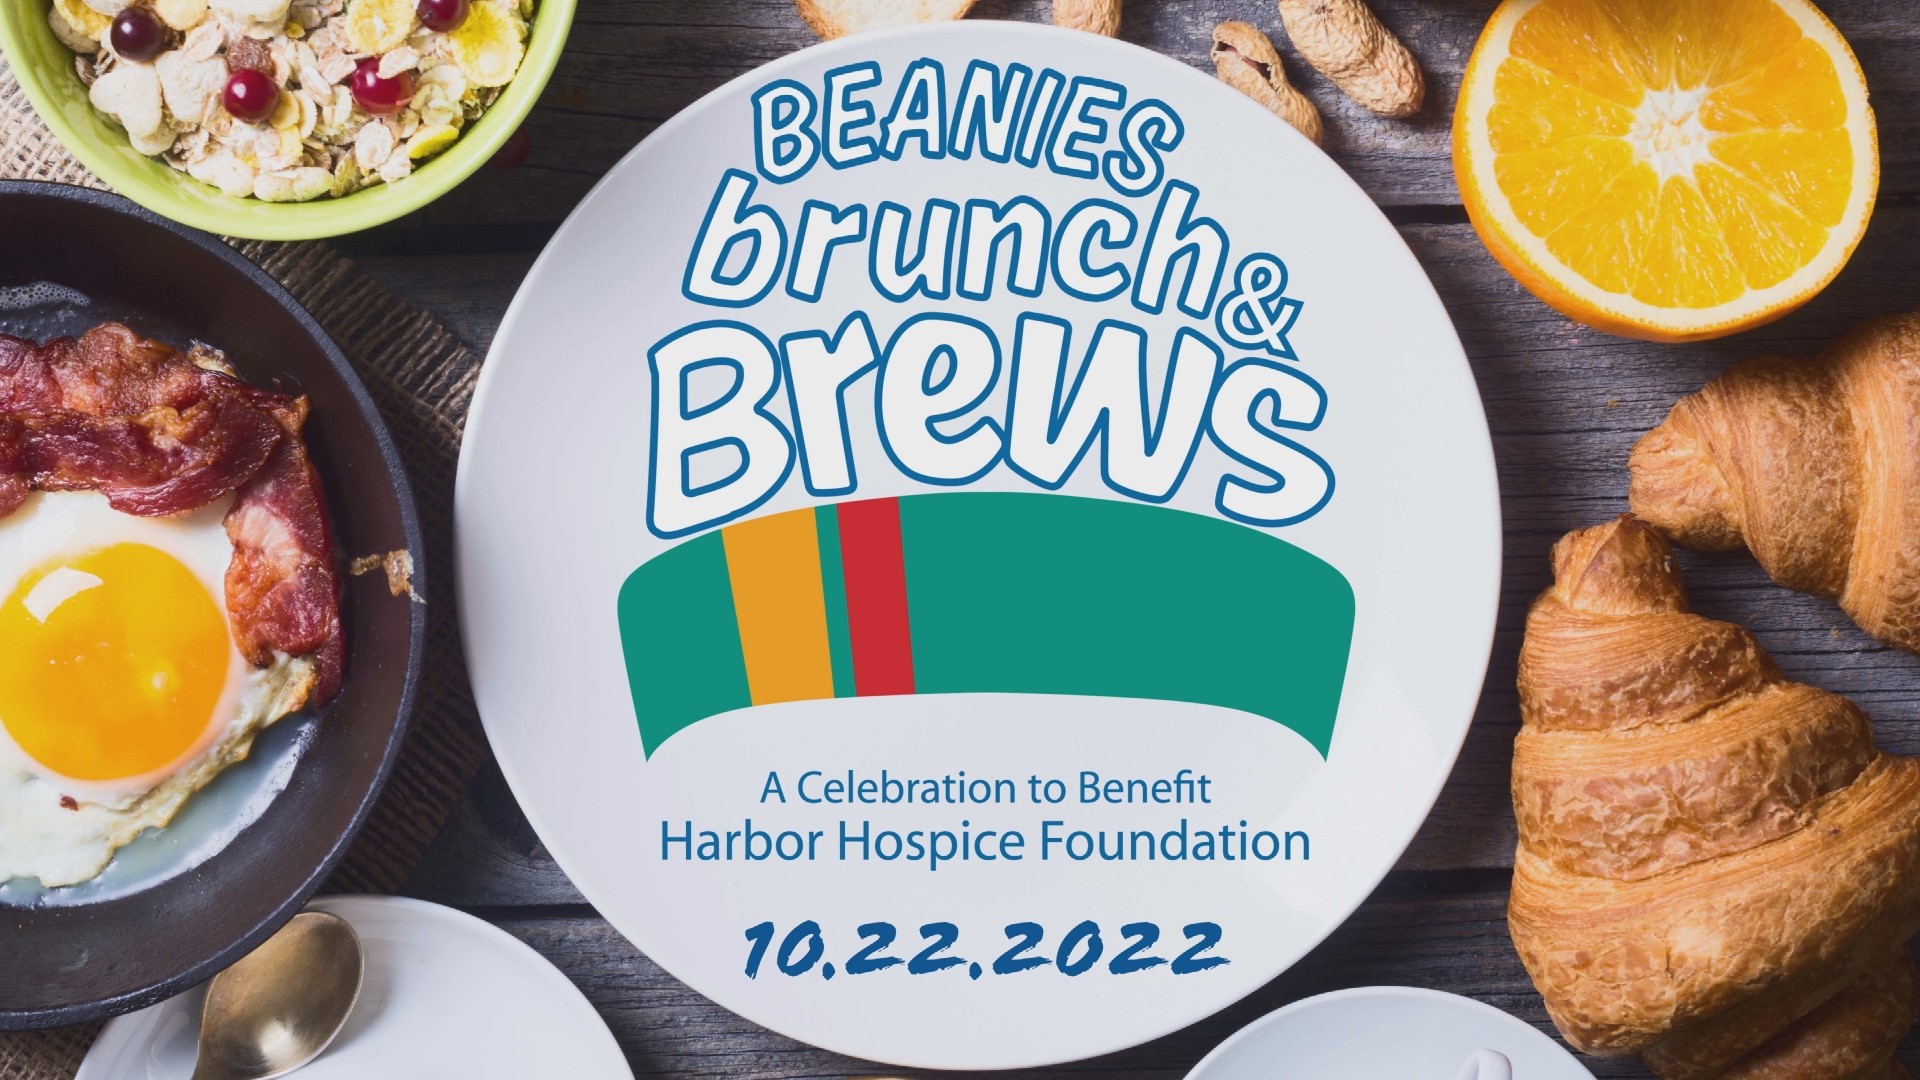 The event will raise money for the Harbor Hospice Foundation.